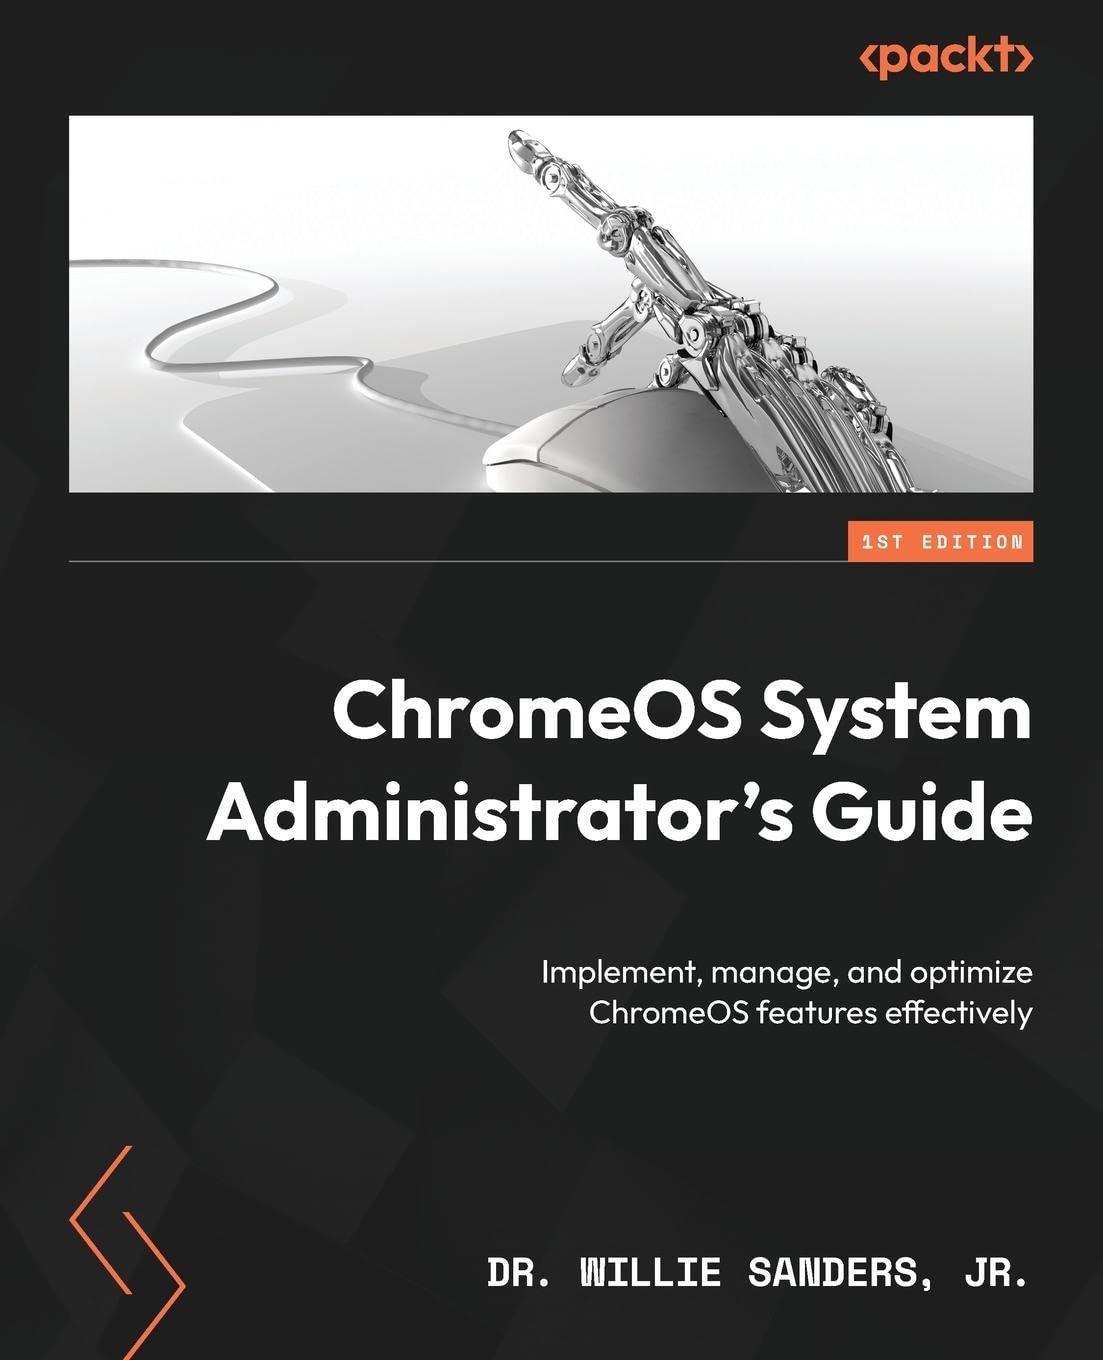 chromeos system administrator's guide implement manage and optimize chromeos features effectively 1st edition